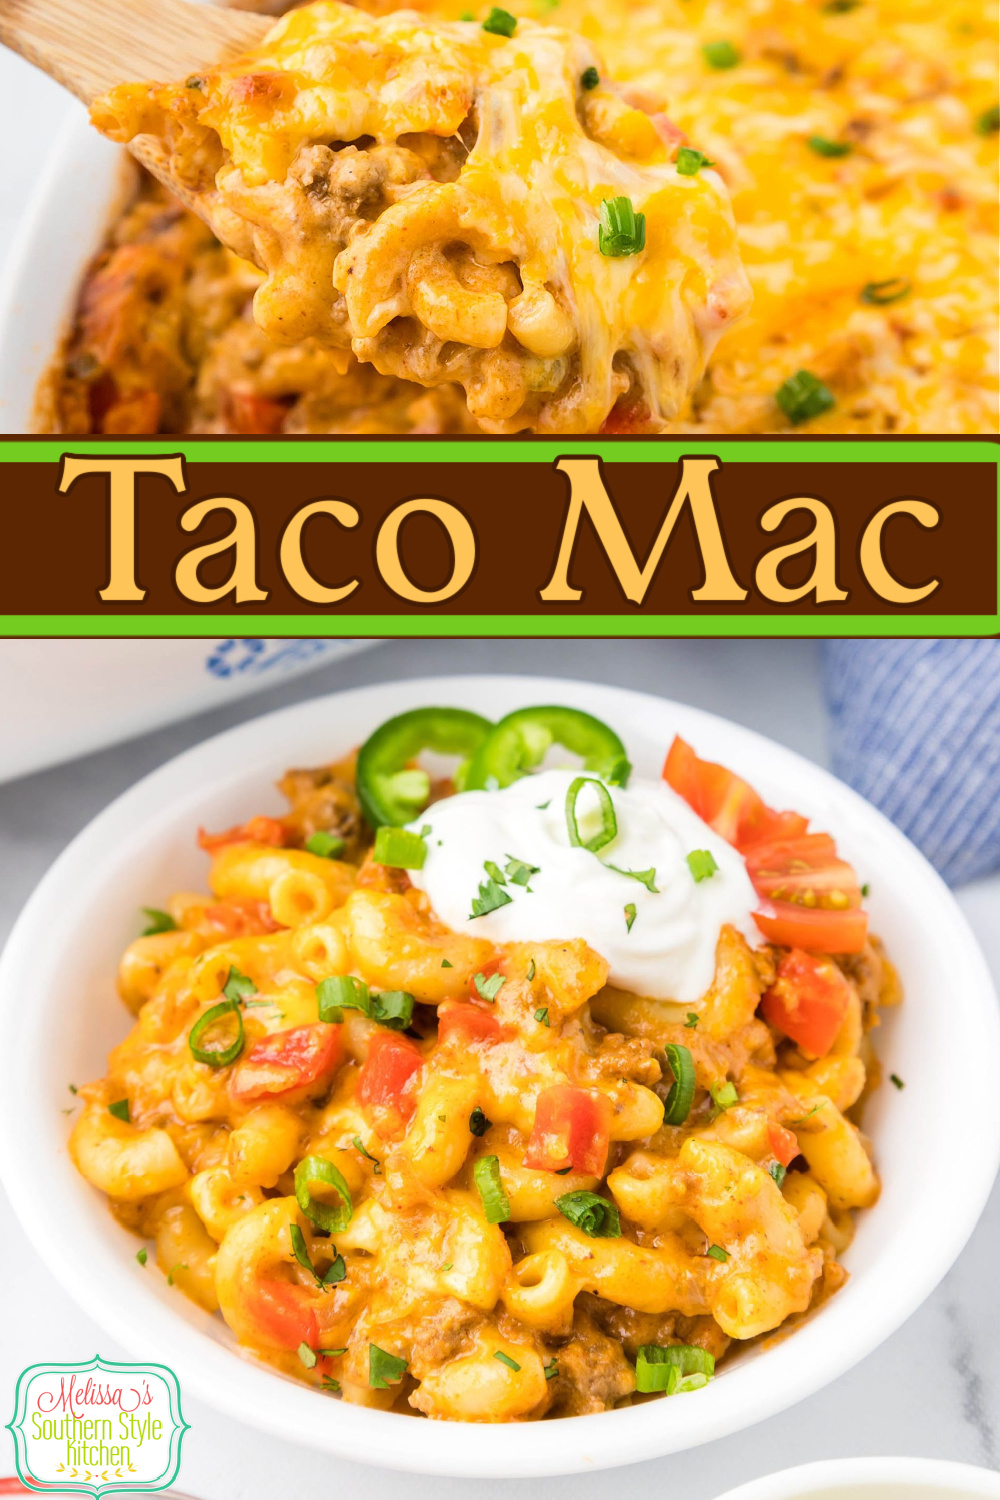 Treat the family to kicked up Taco Mac for supper #macaroni #macaroniandcheese #tacos #tacomac #tacorecipes #macandcheese #southernmacaroniandcheese #tacobeef #macaronicasserole via @melissasssk